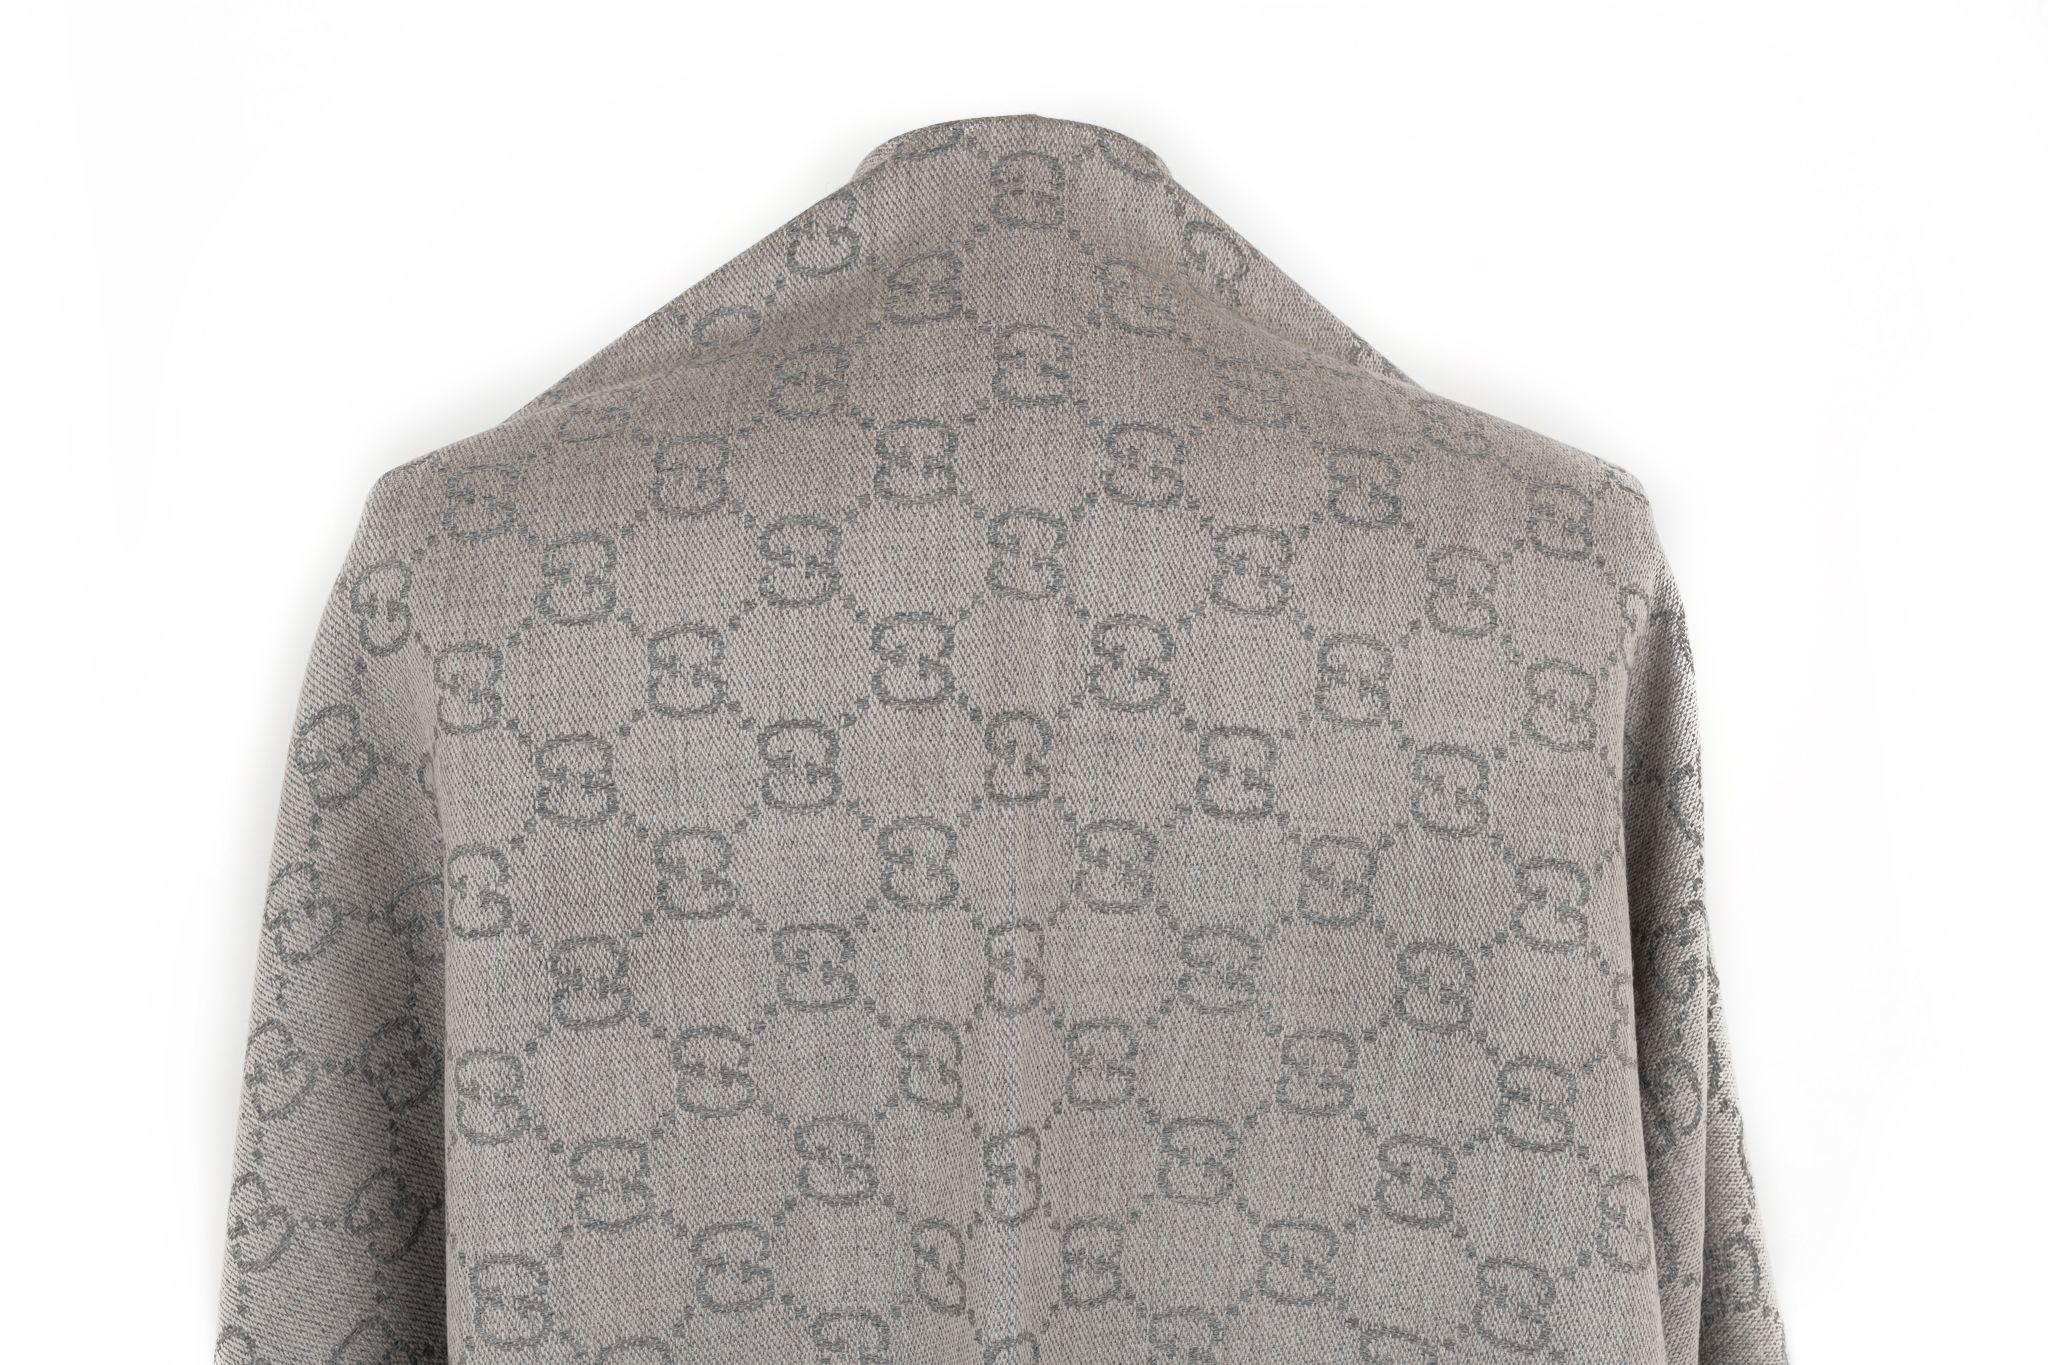 Gucci wool shawl in grey with a GG monogram logo canvas print. The piece is in new condition.